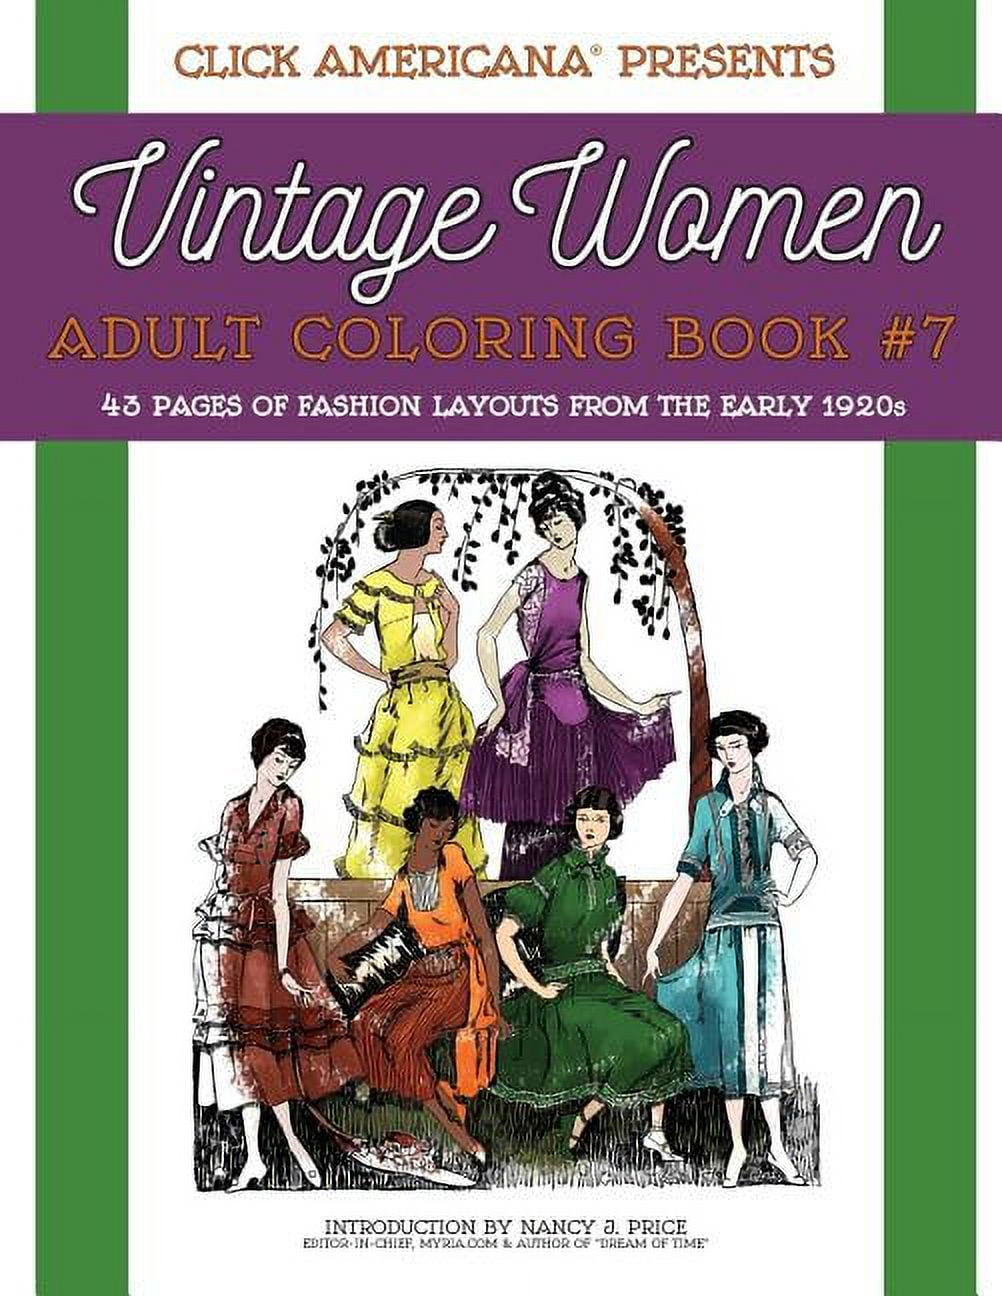 30 Women of the 20's Coloring Book for Her Grayscale Colouring